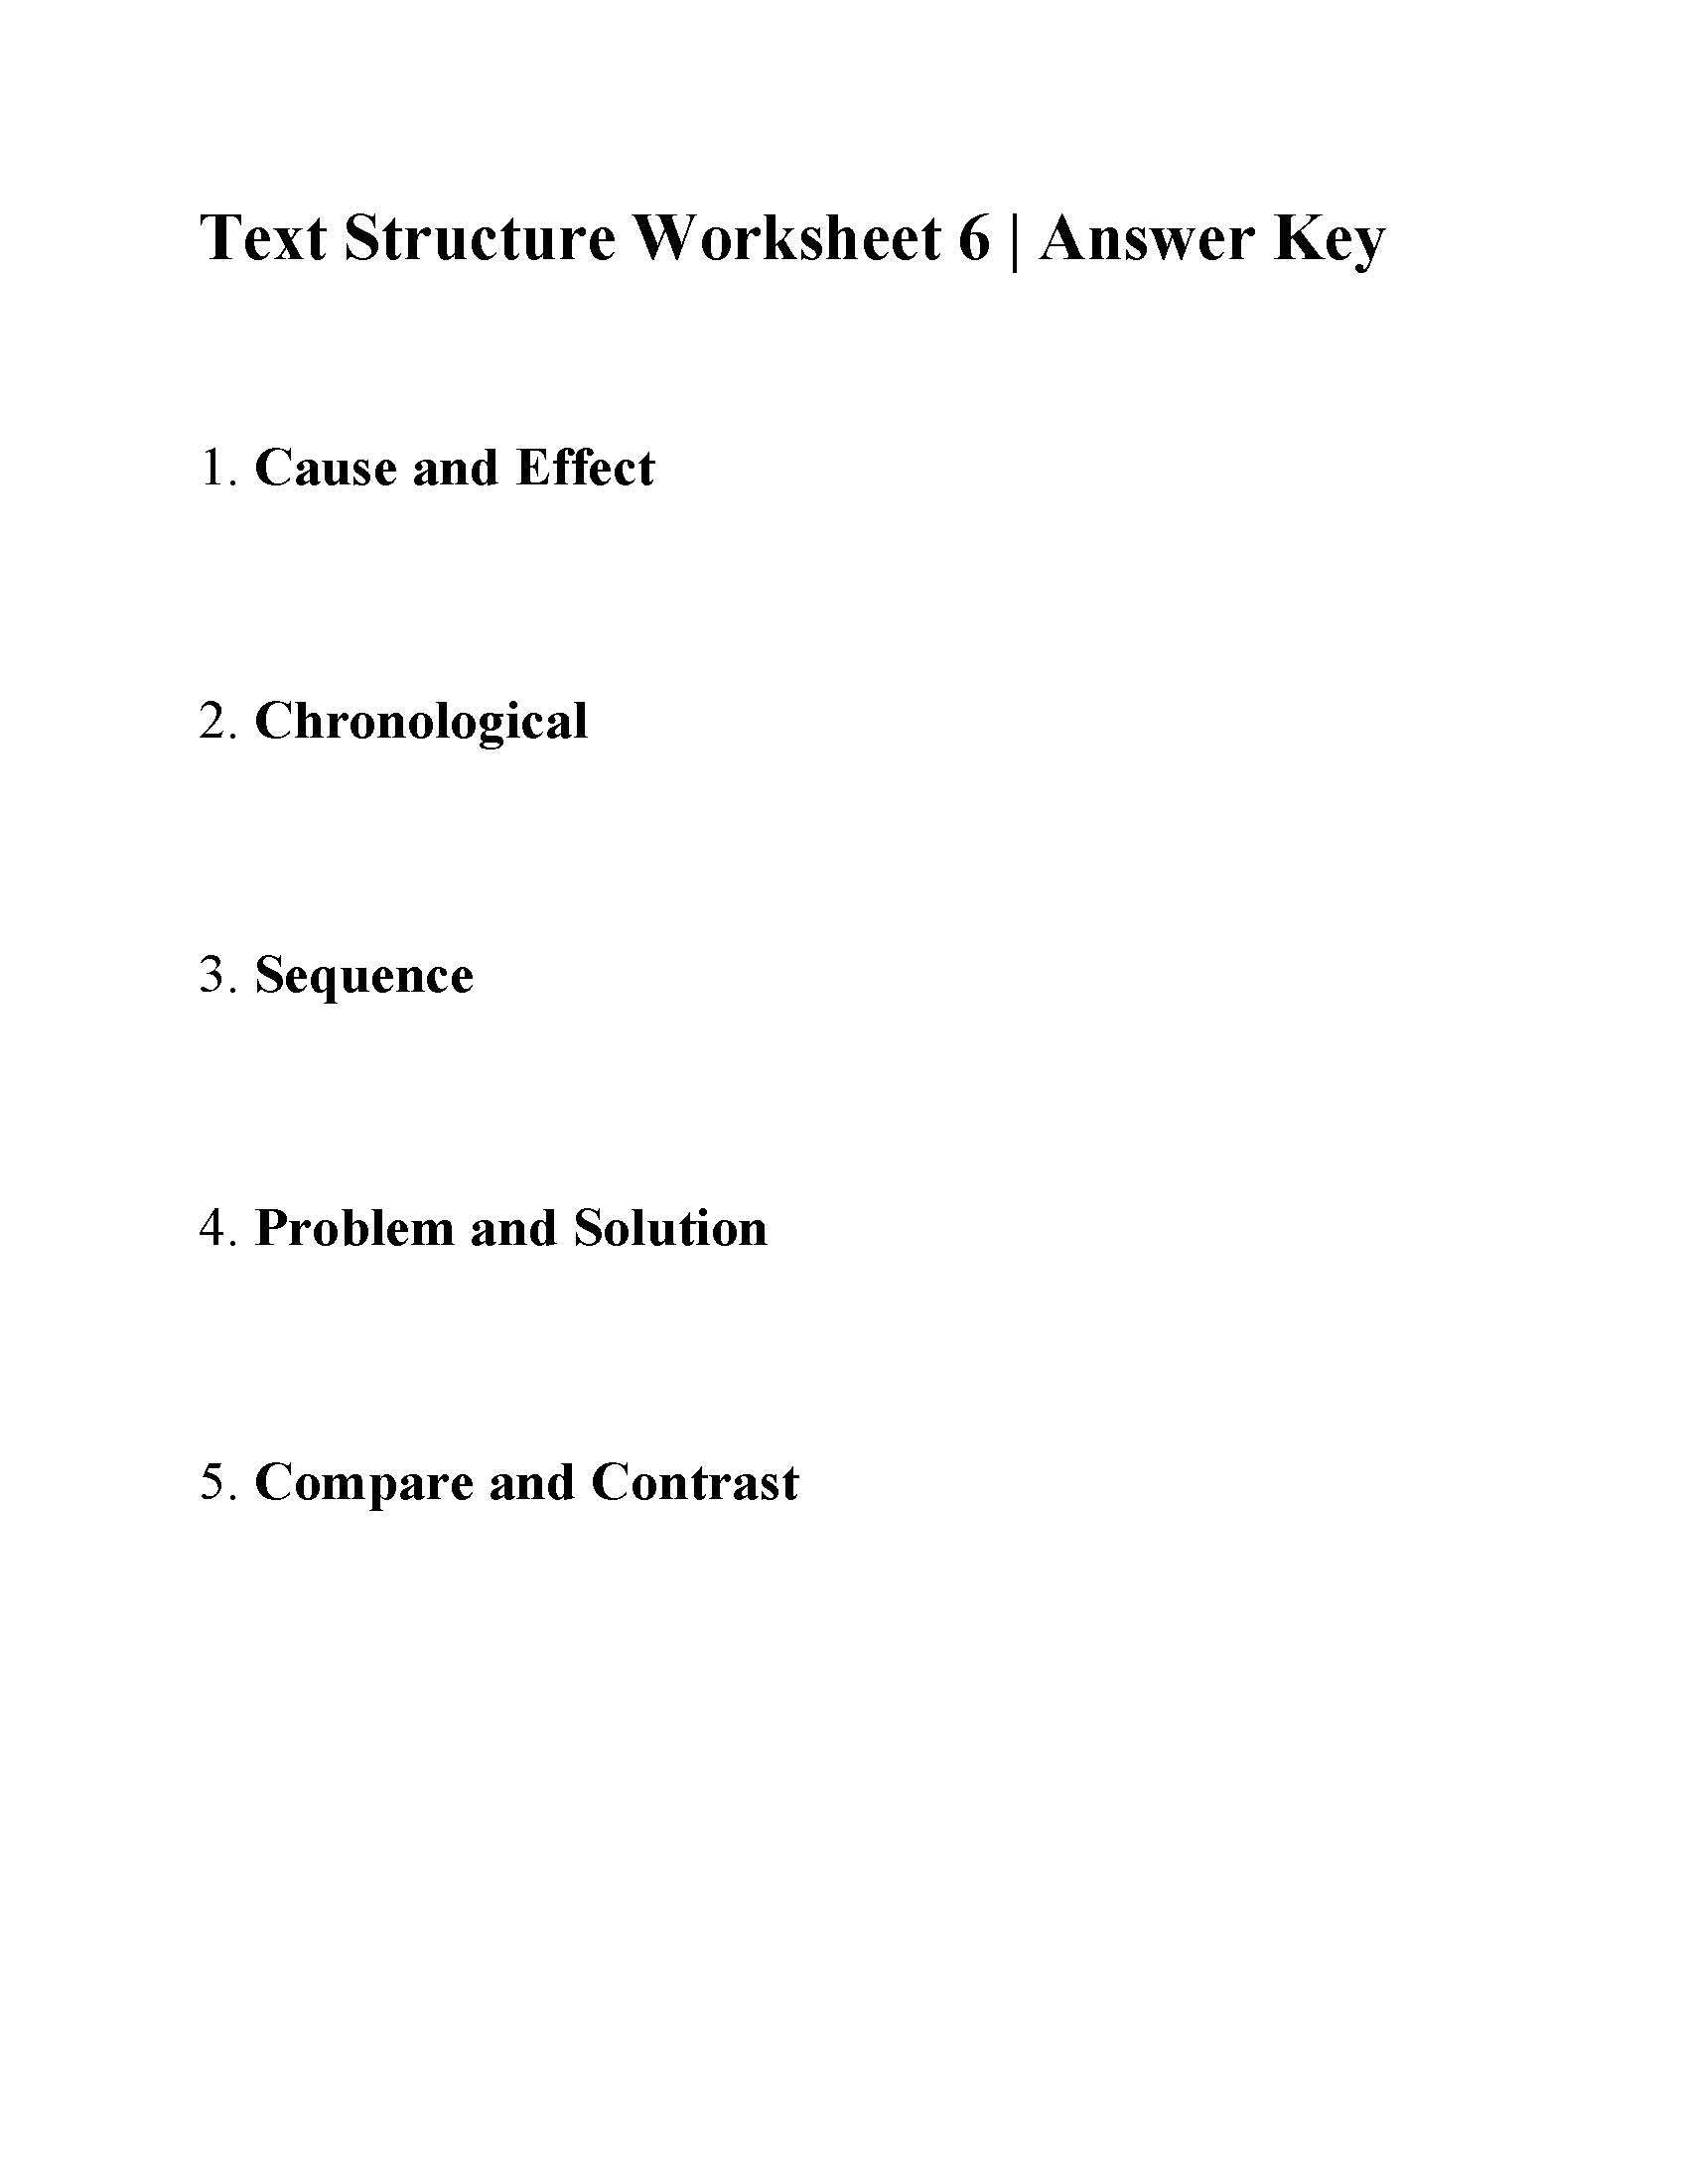 Text Structure Worksheet 6 | Answers